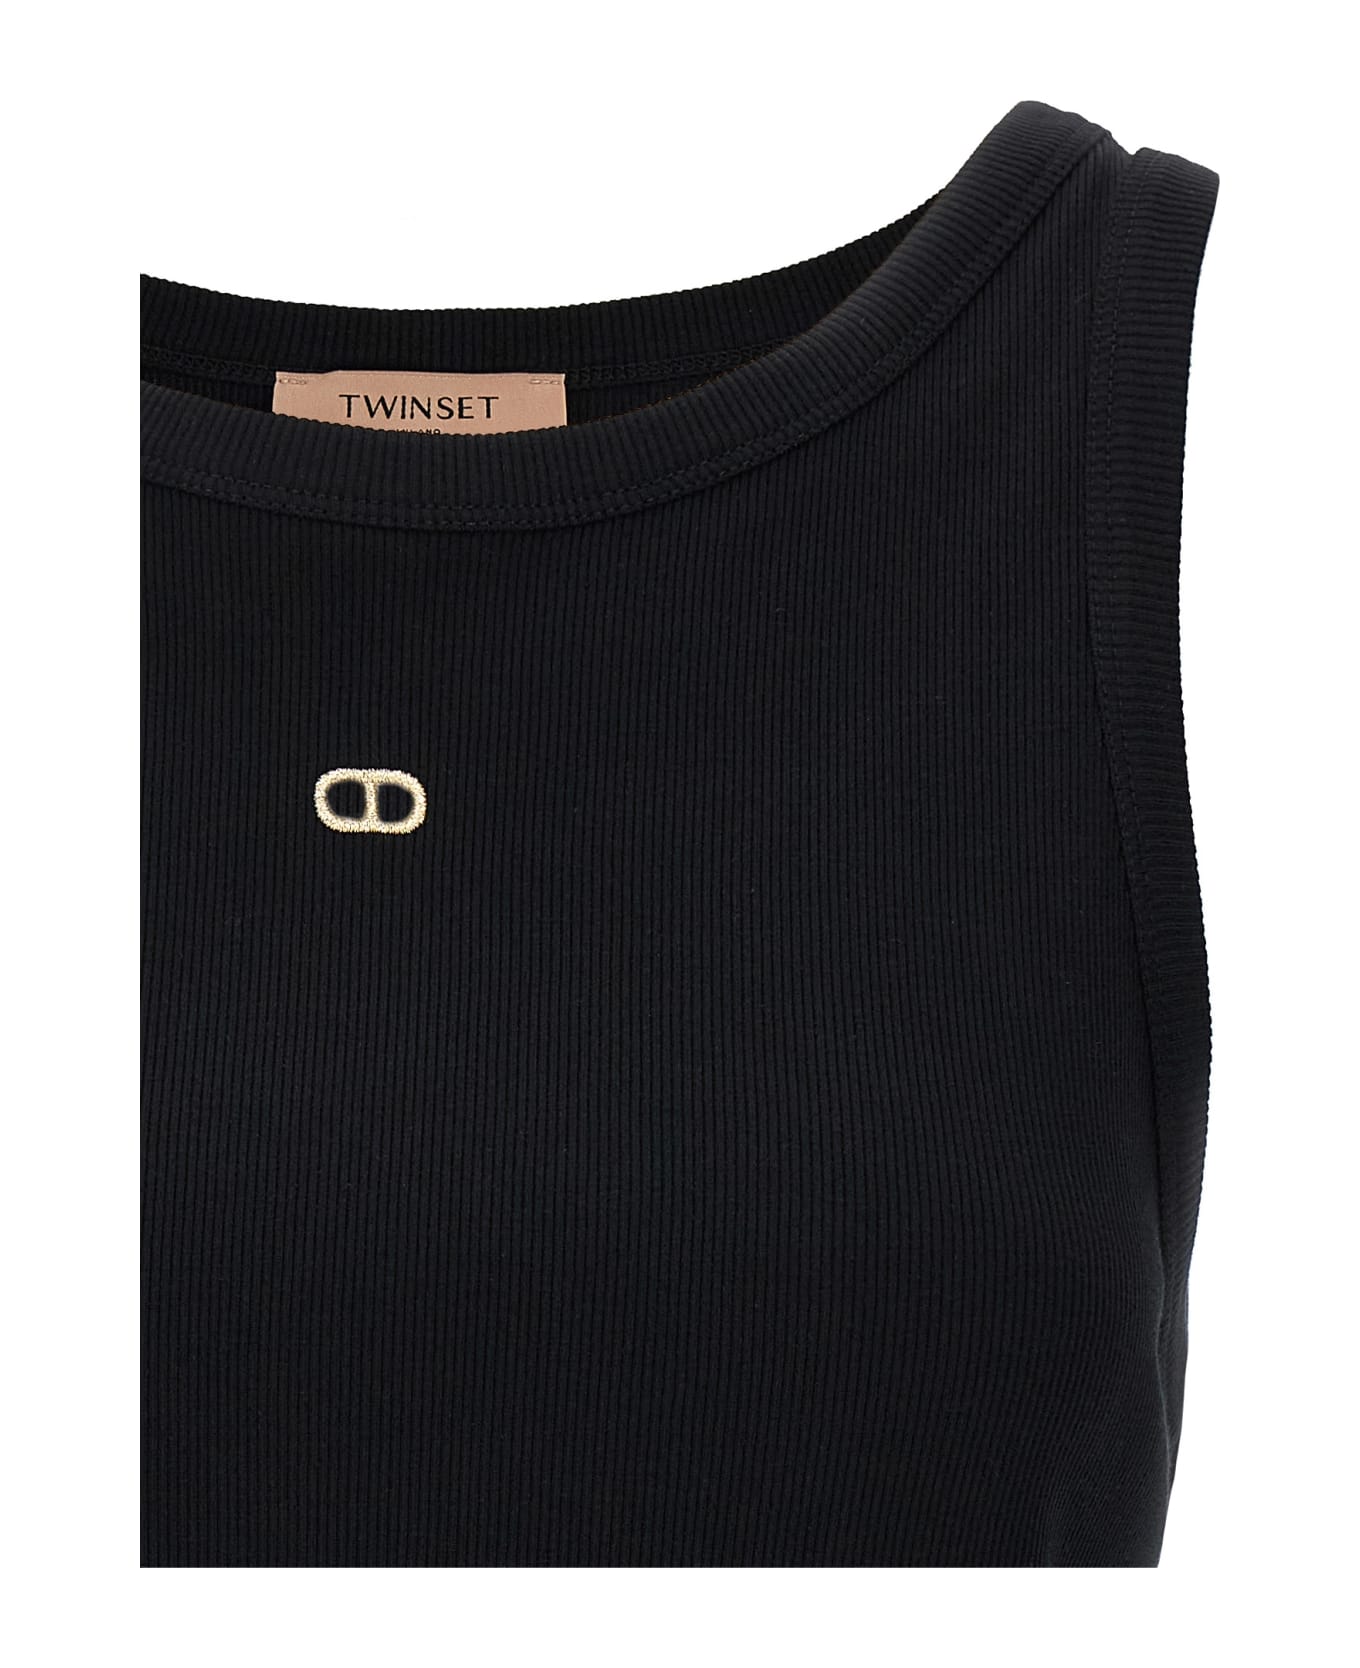 TwinSet Logo Embroidery Tank Top - Black  